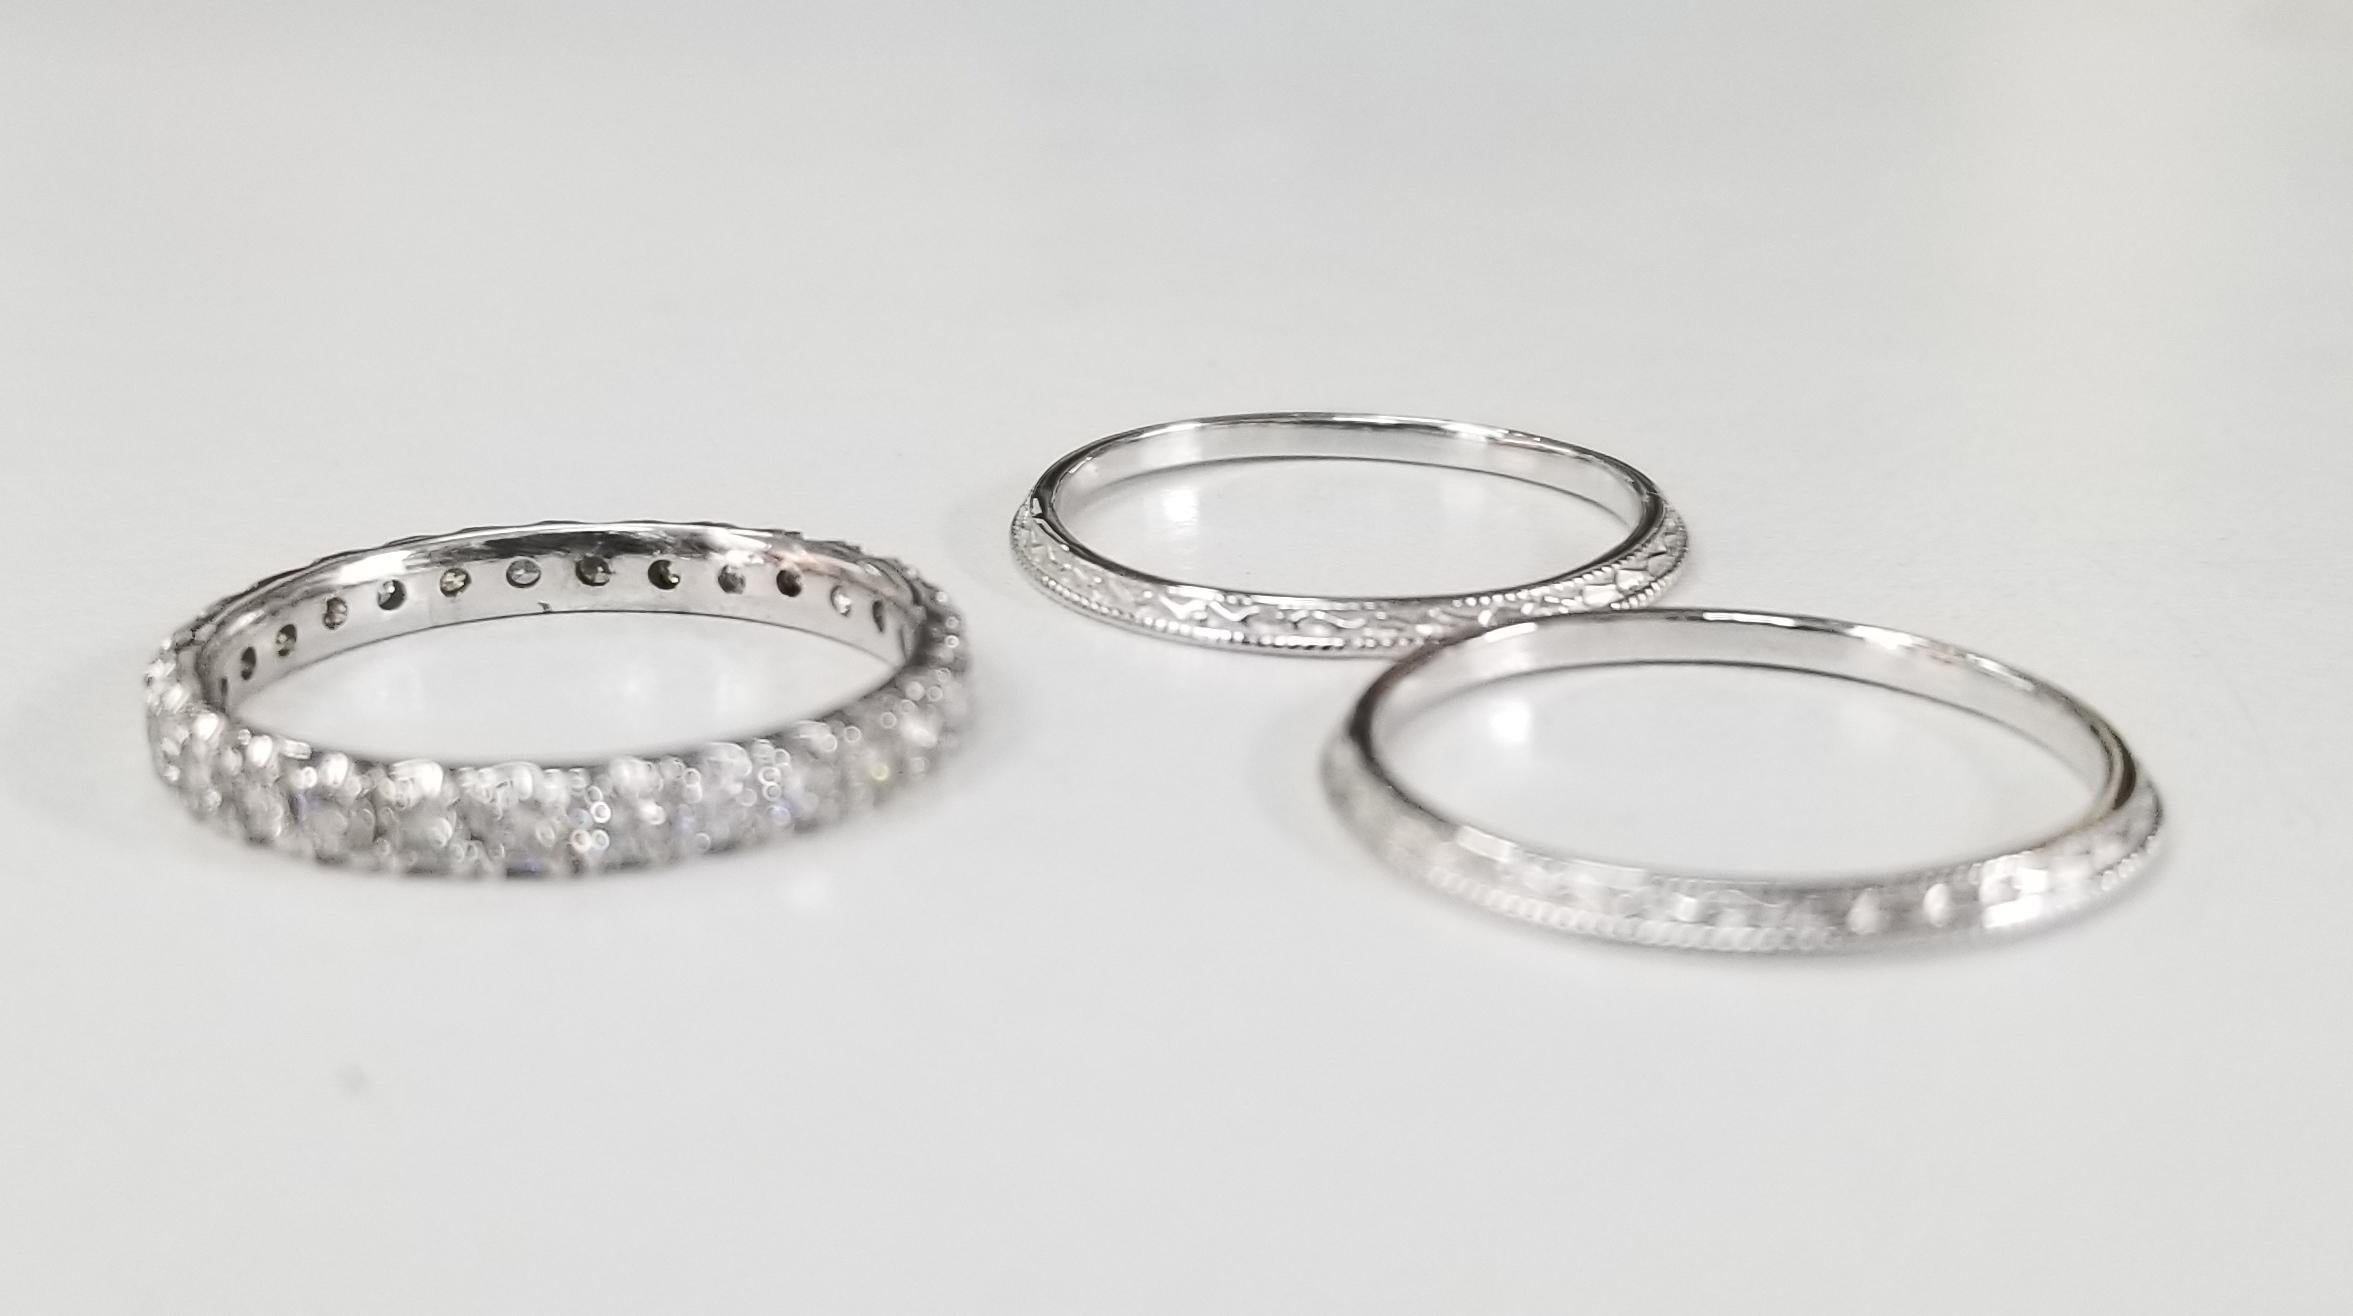 14k white gold diamond eternity ring with 28 round full cut diamonds of very fine quality weighing .70pts. with 2 14k white gold hand engraved beveled rings.  3 separate rings to mix and match. size 6